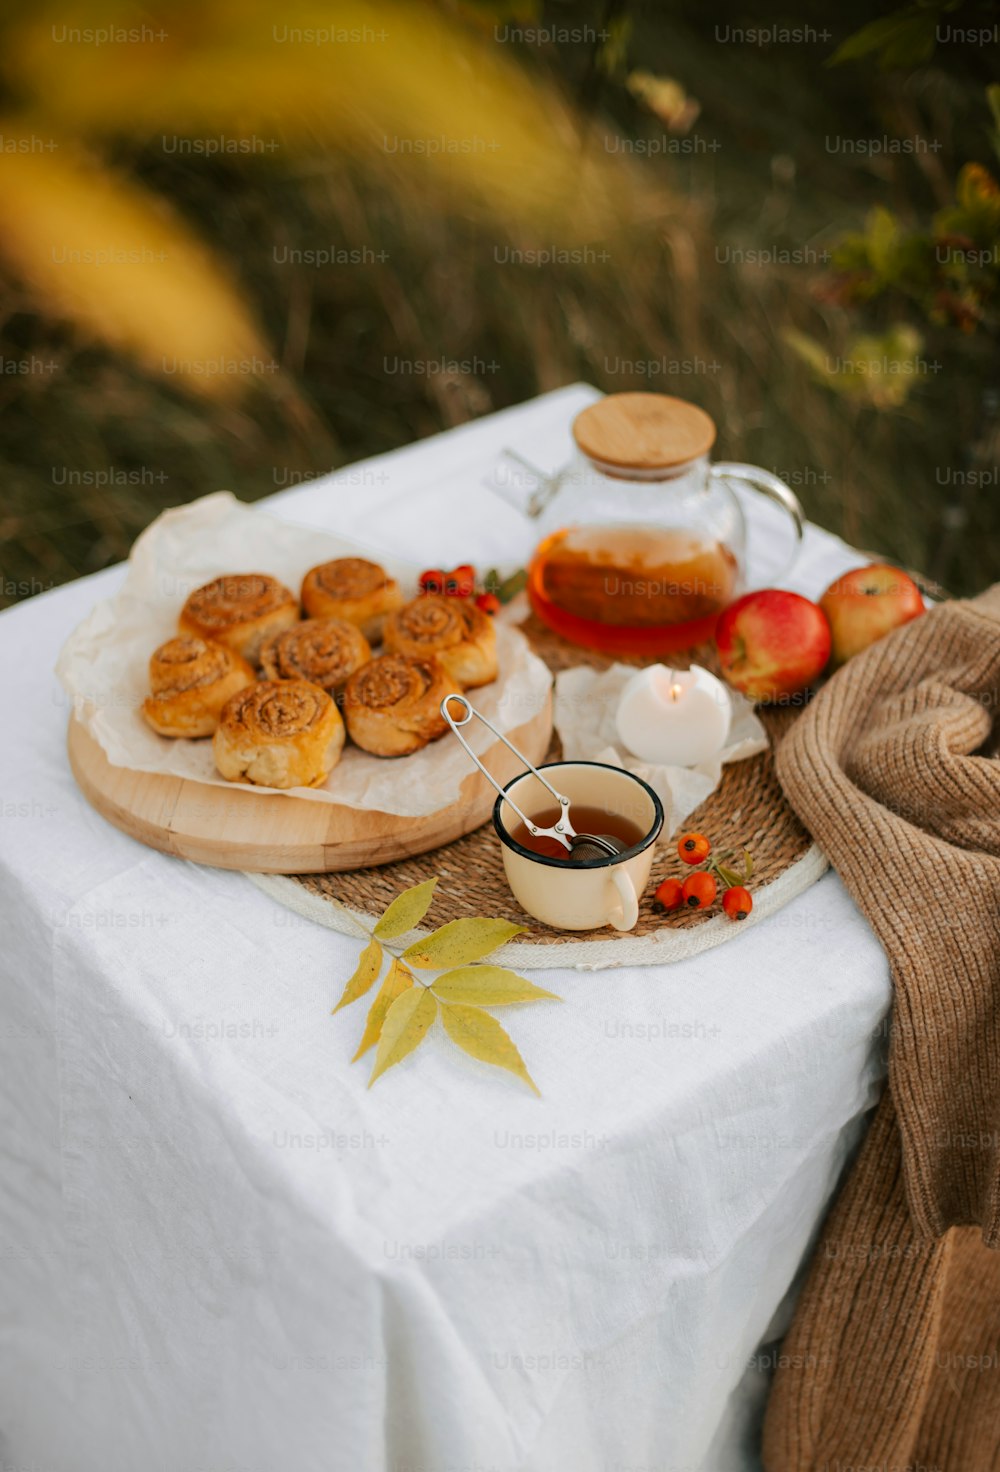 a table topped with a plate of food and a cup of coffee